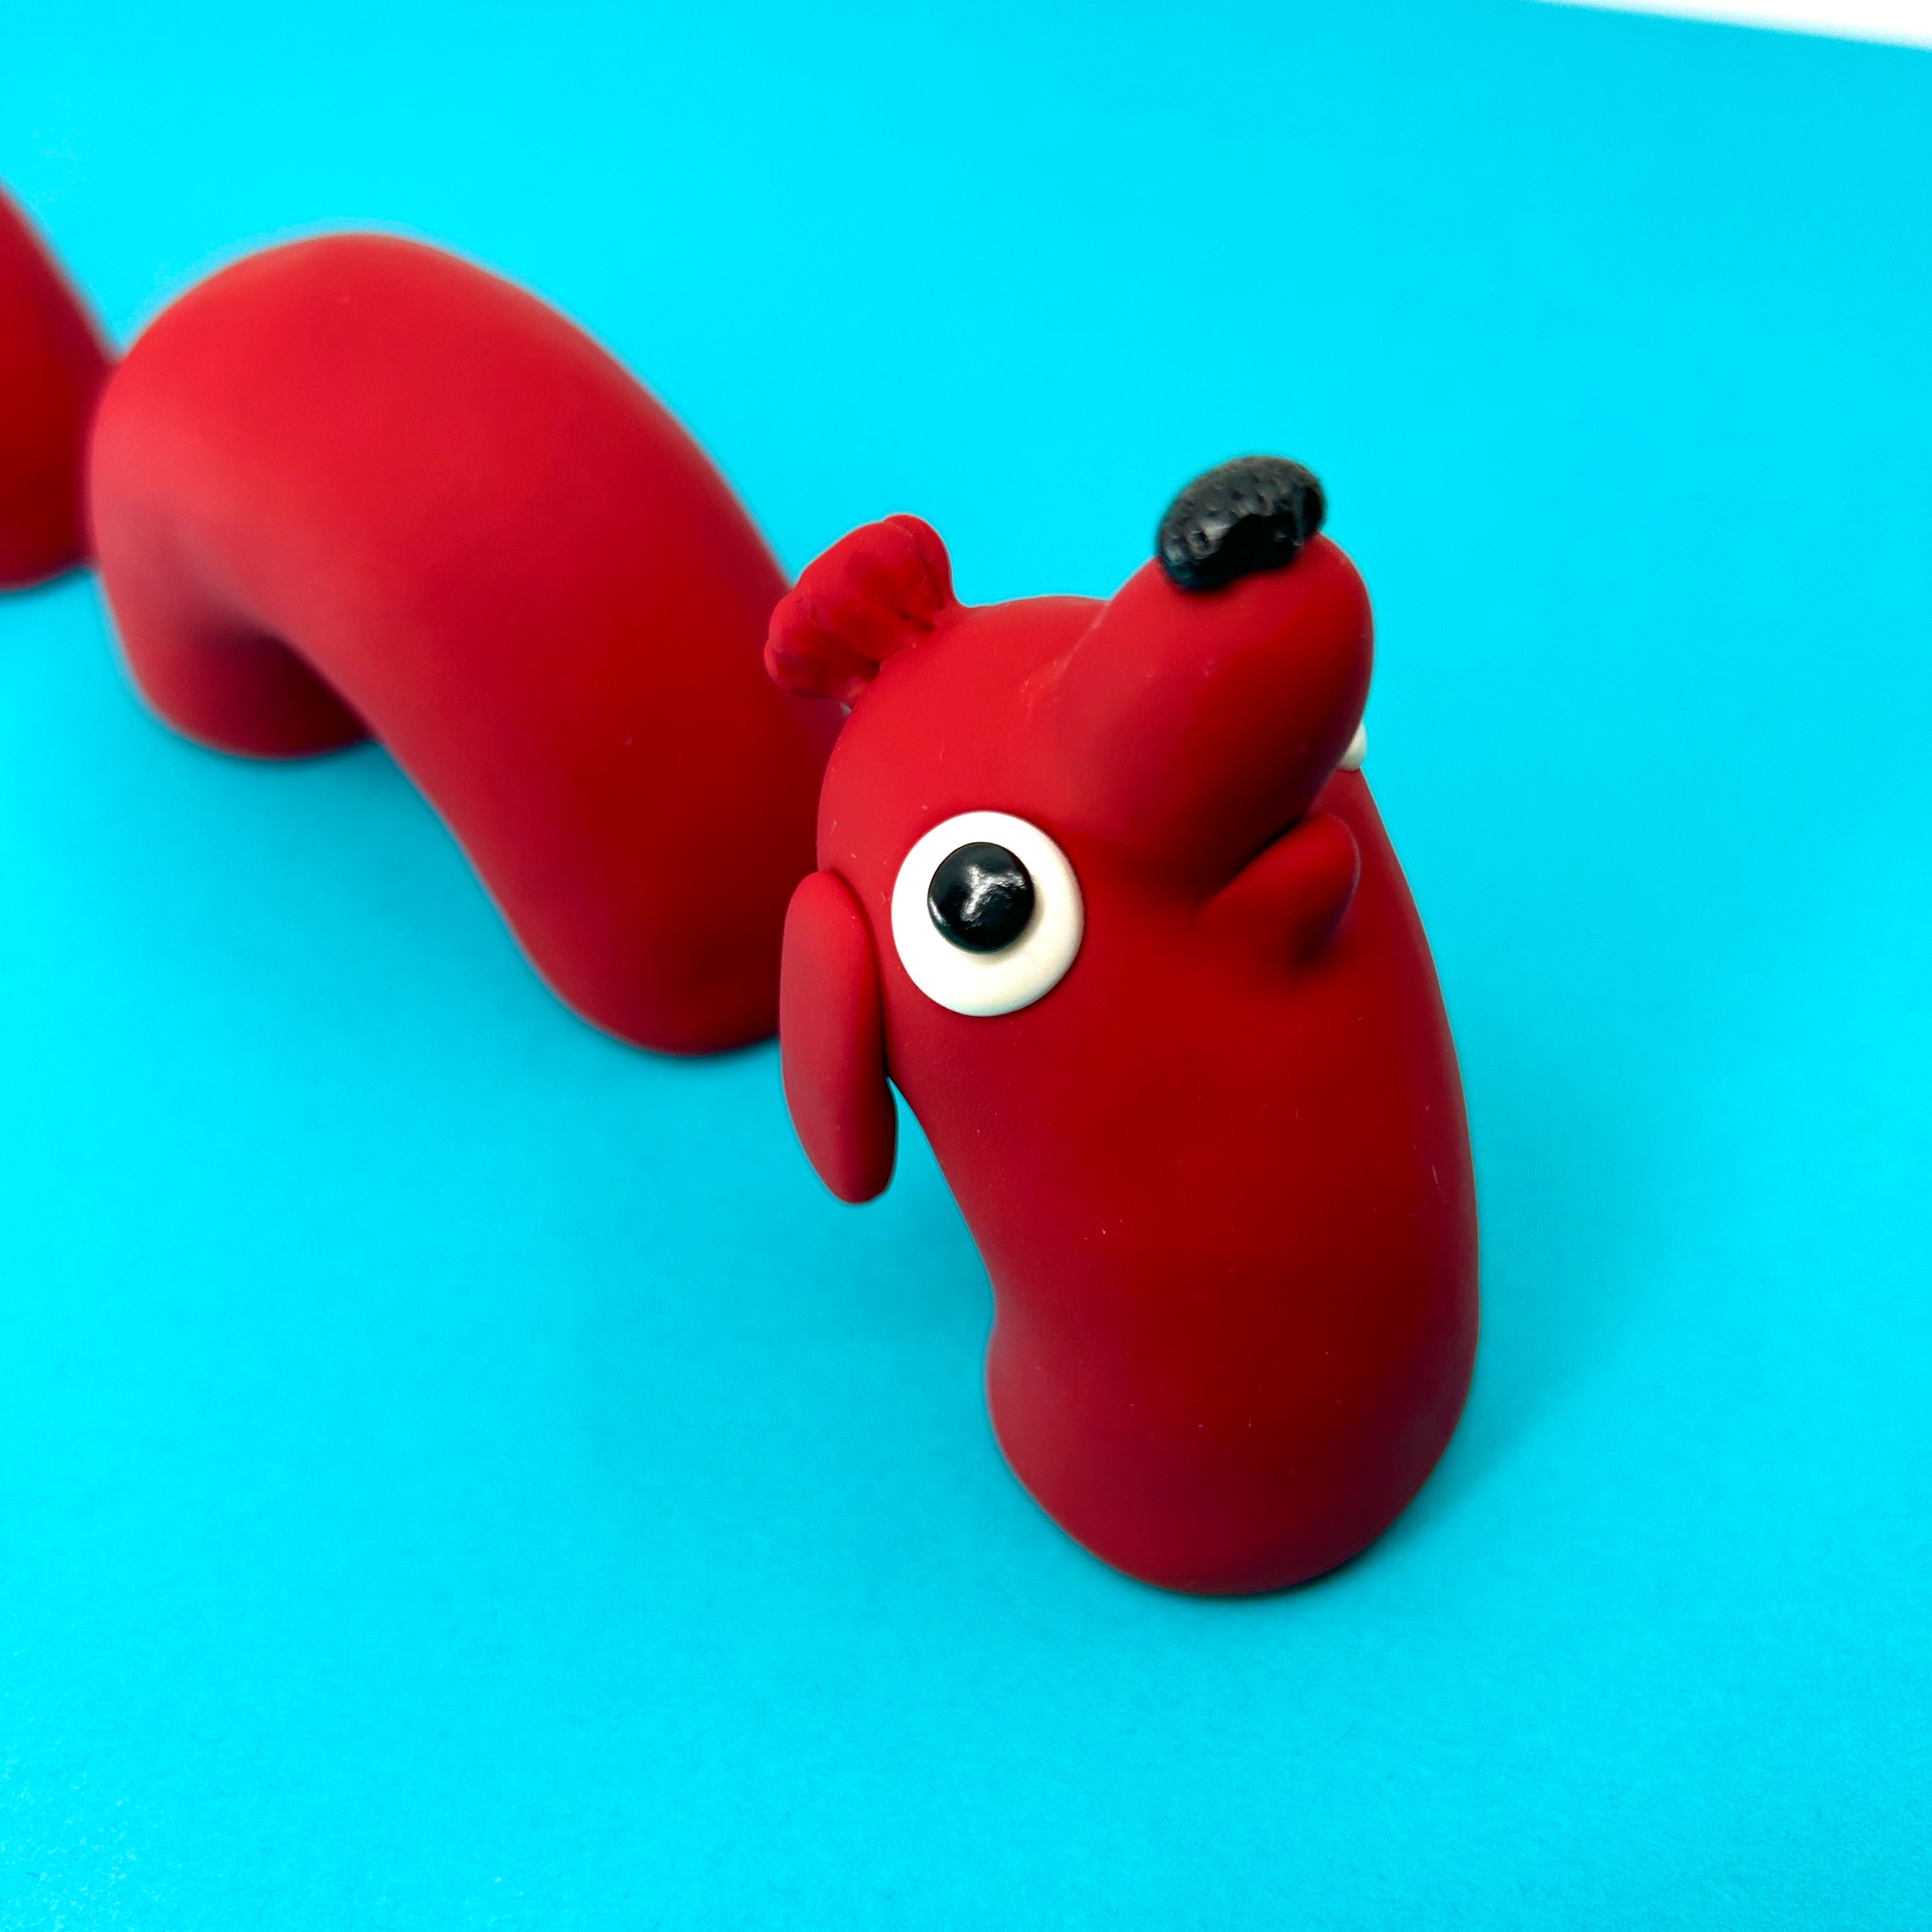 Polymer clay animal figure toy from Simon Says Macy & Friends - Ode to a Sausage.